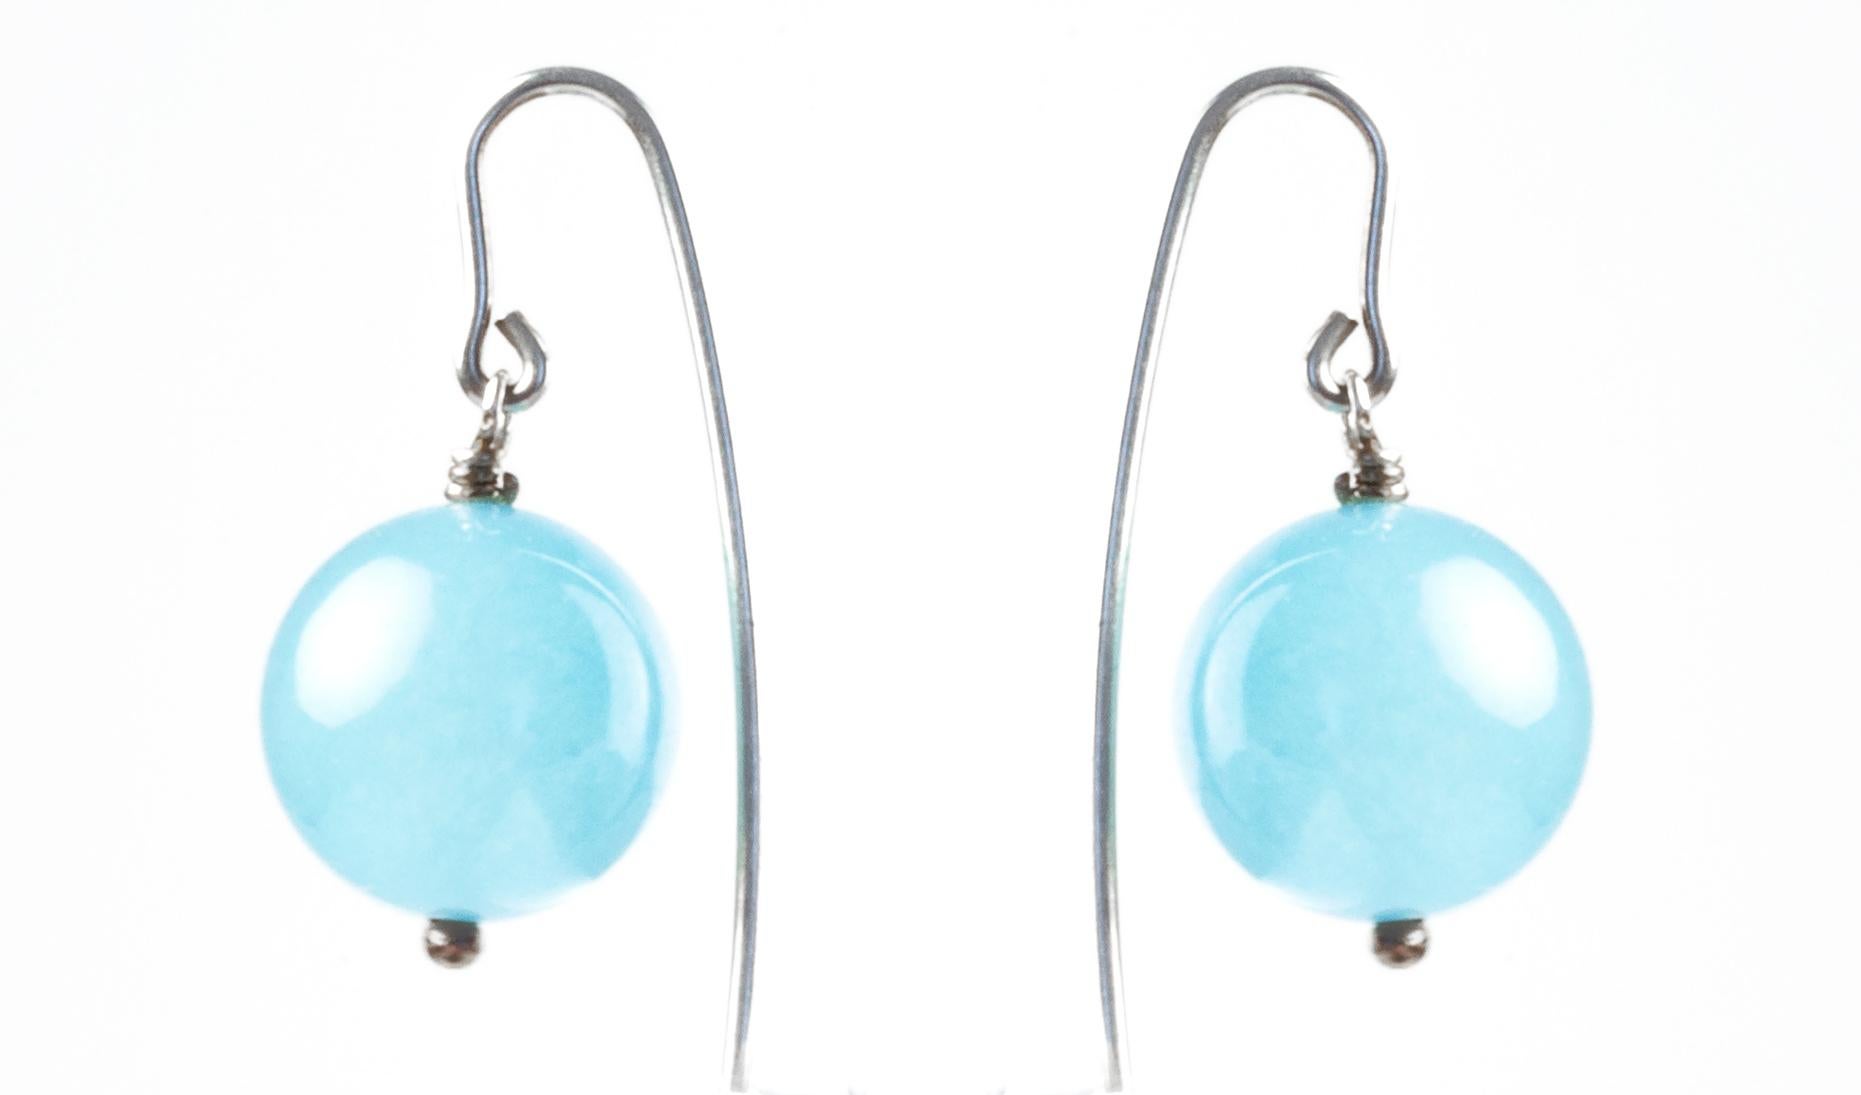 Elegant, modern and minimalist pair of silver earrings with a light blue agate pearl. Designed and hand made in Norway by silversmith Anne Leger. Both earrings are in excellent condition.
